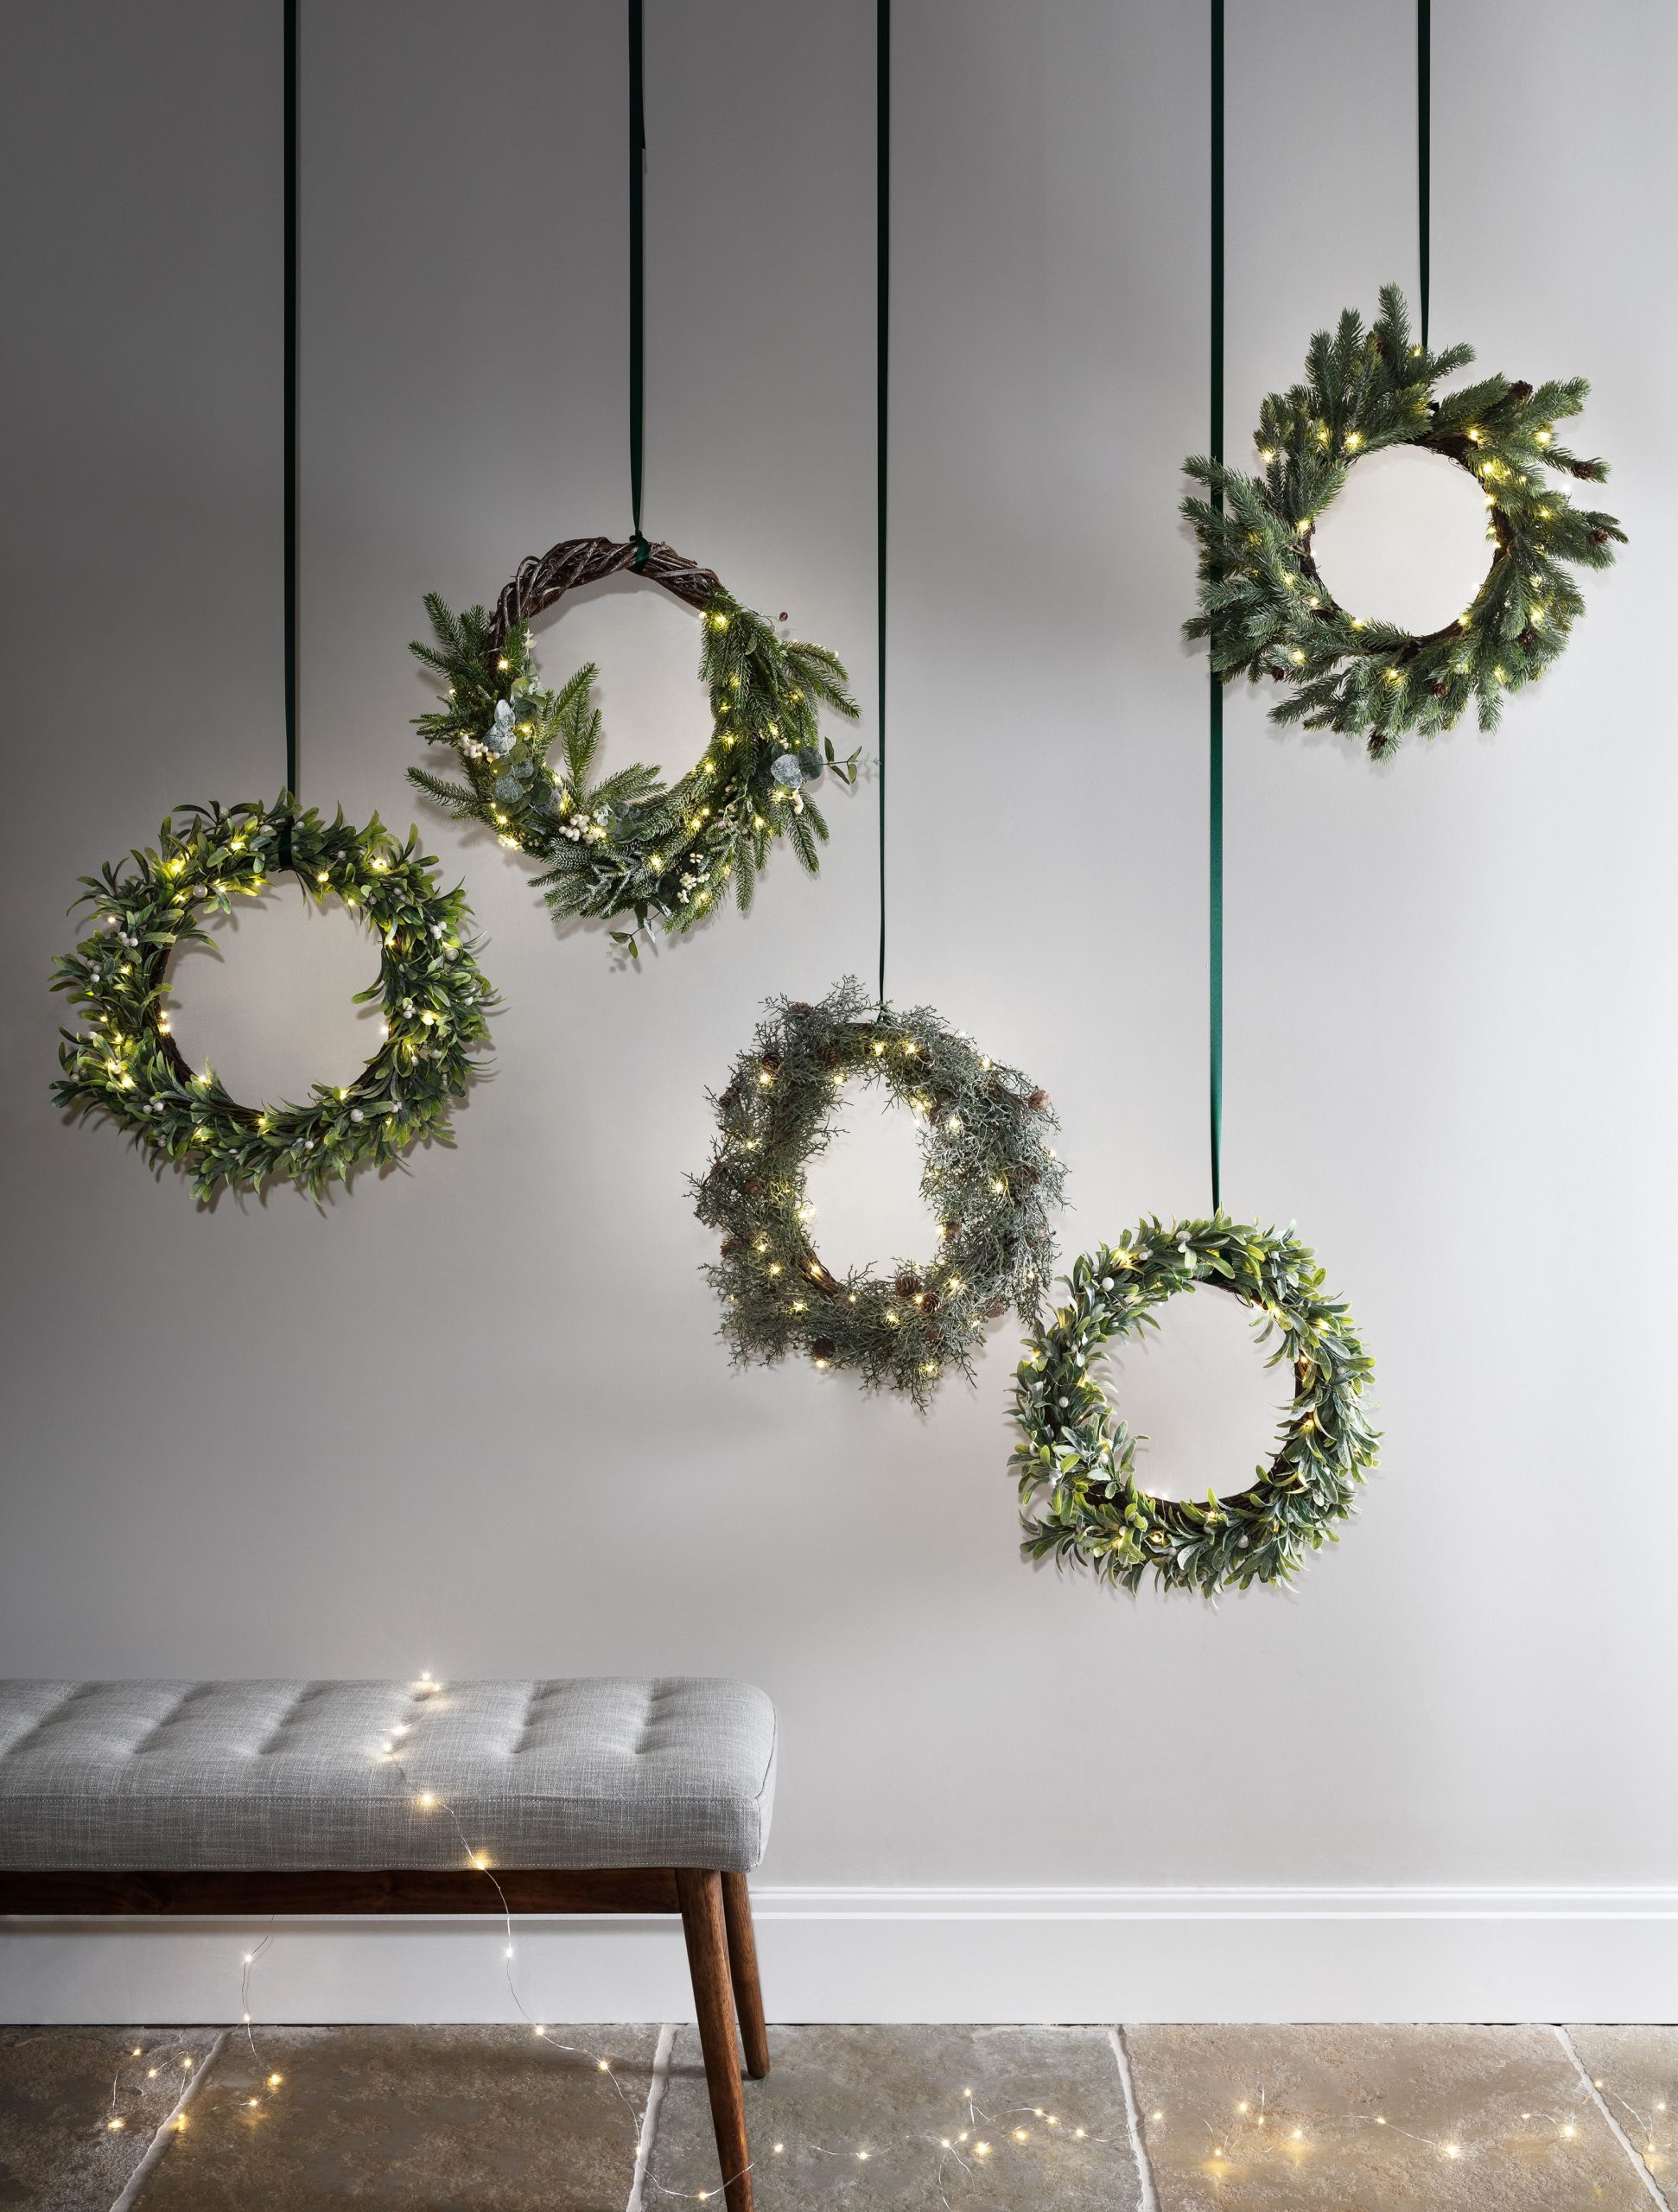 Hanging Wreath with the String Light